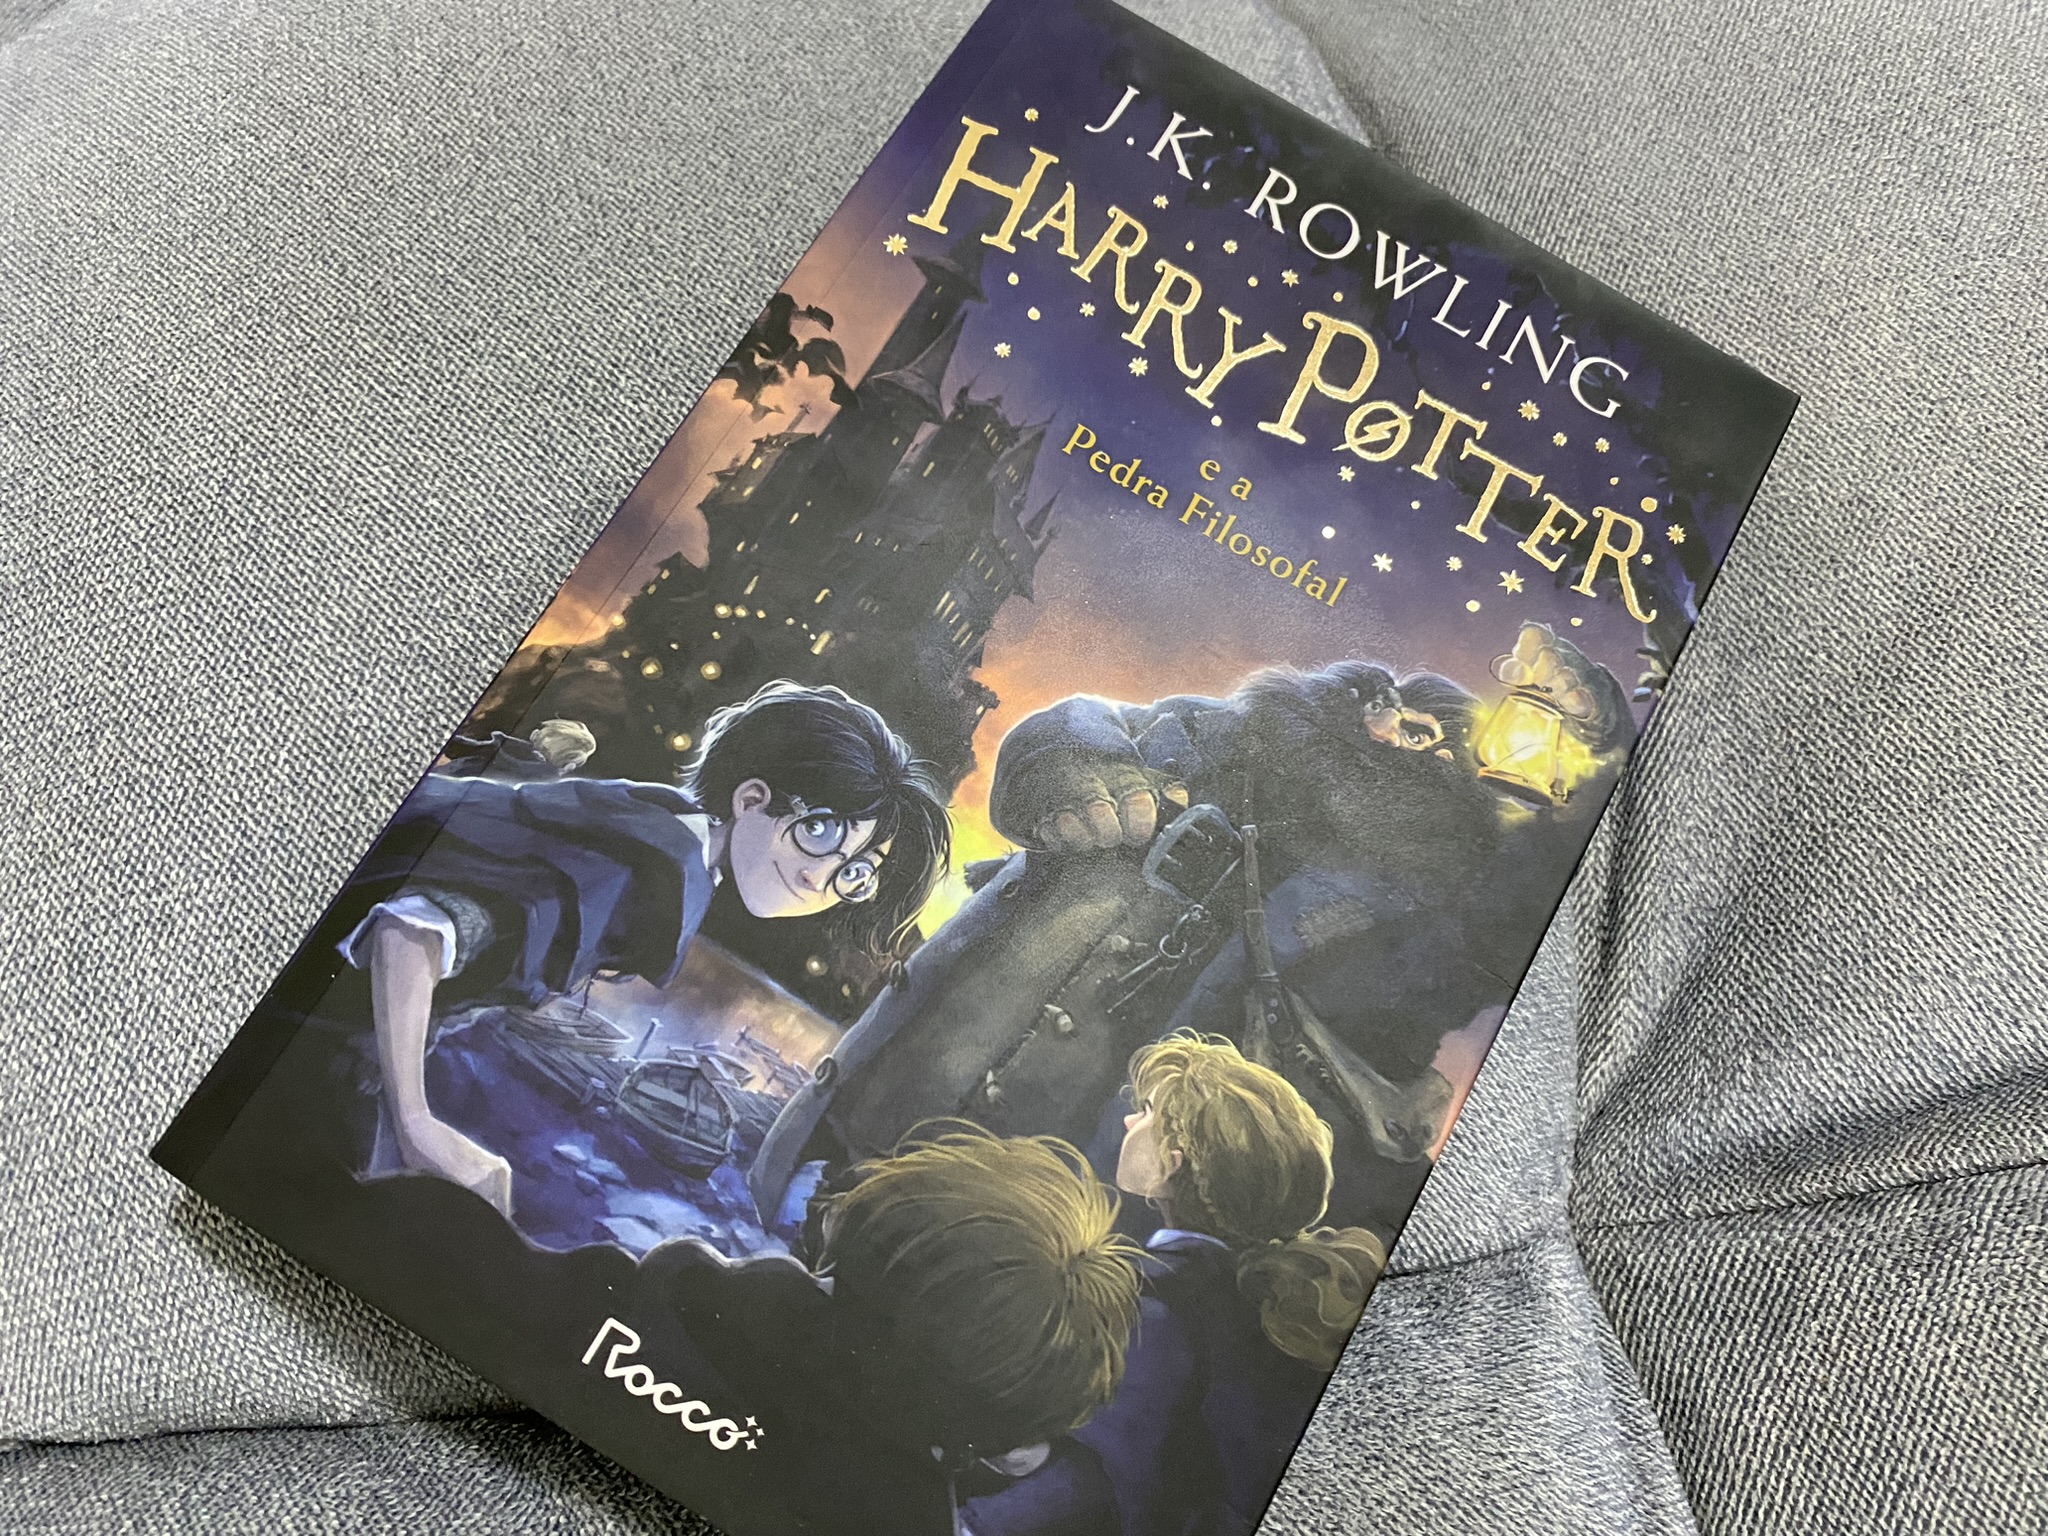 Harry Potter and the Sorcerer's Stone - A young boy in a brave world Review